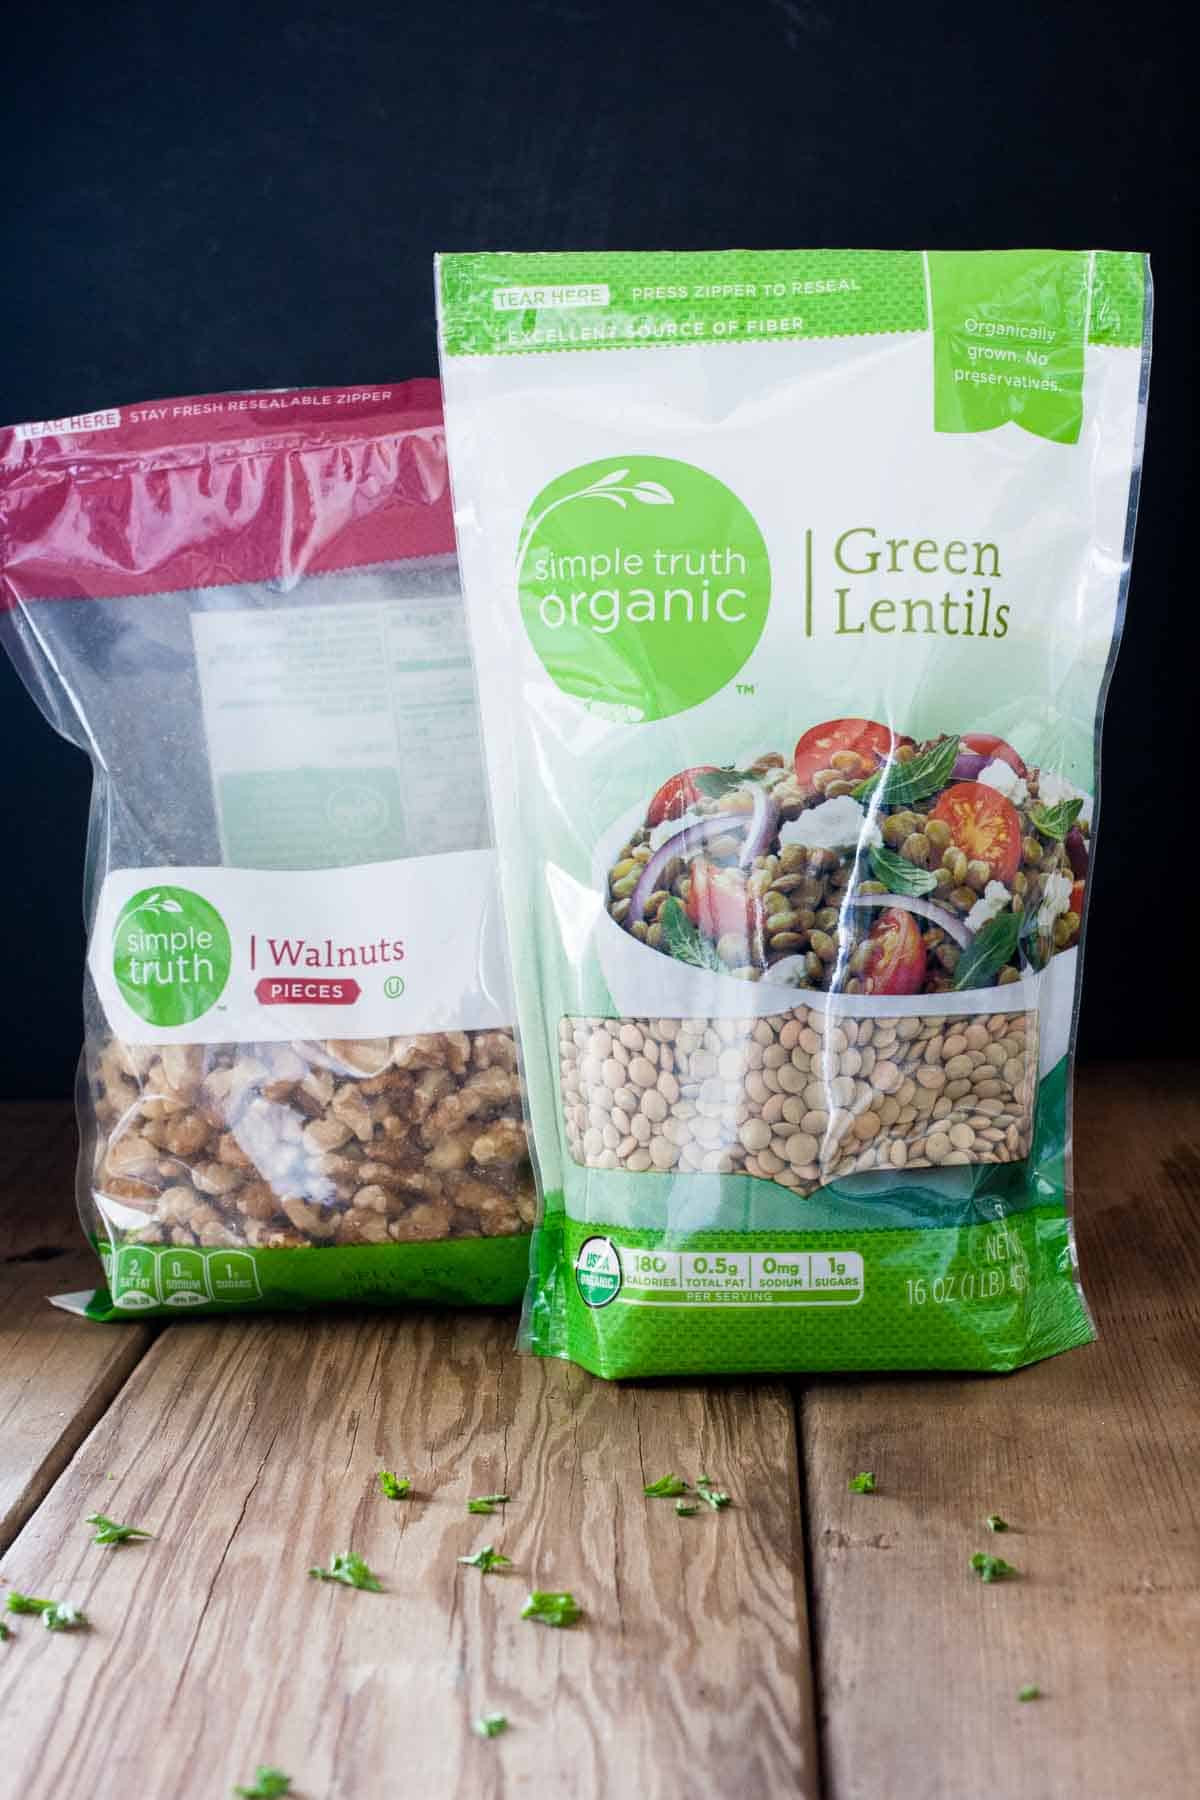 A bag bag of walnuts with a pink top next to a bag of lentils with green edges on a wooden surface.